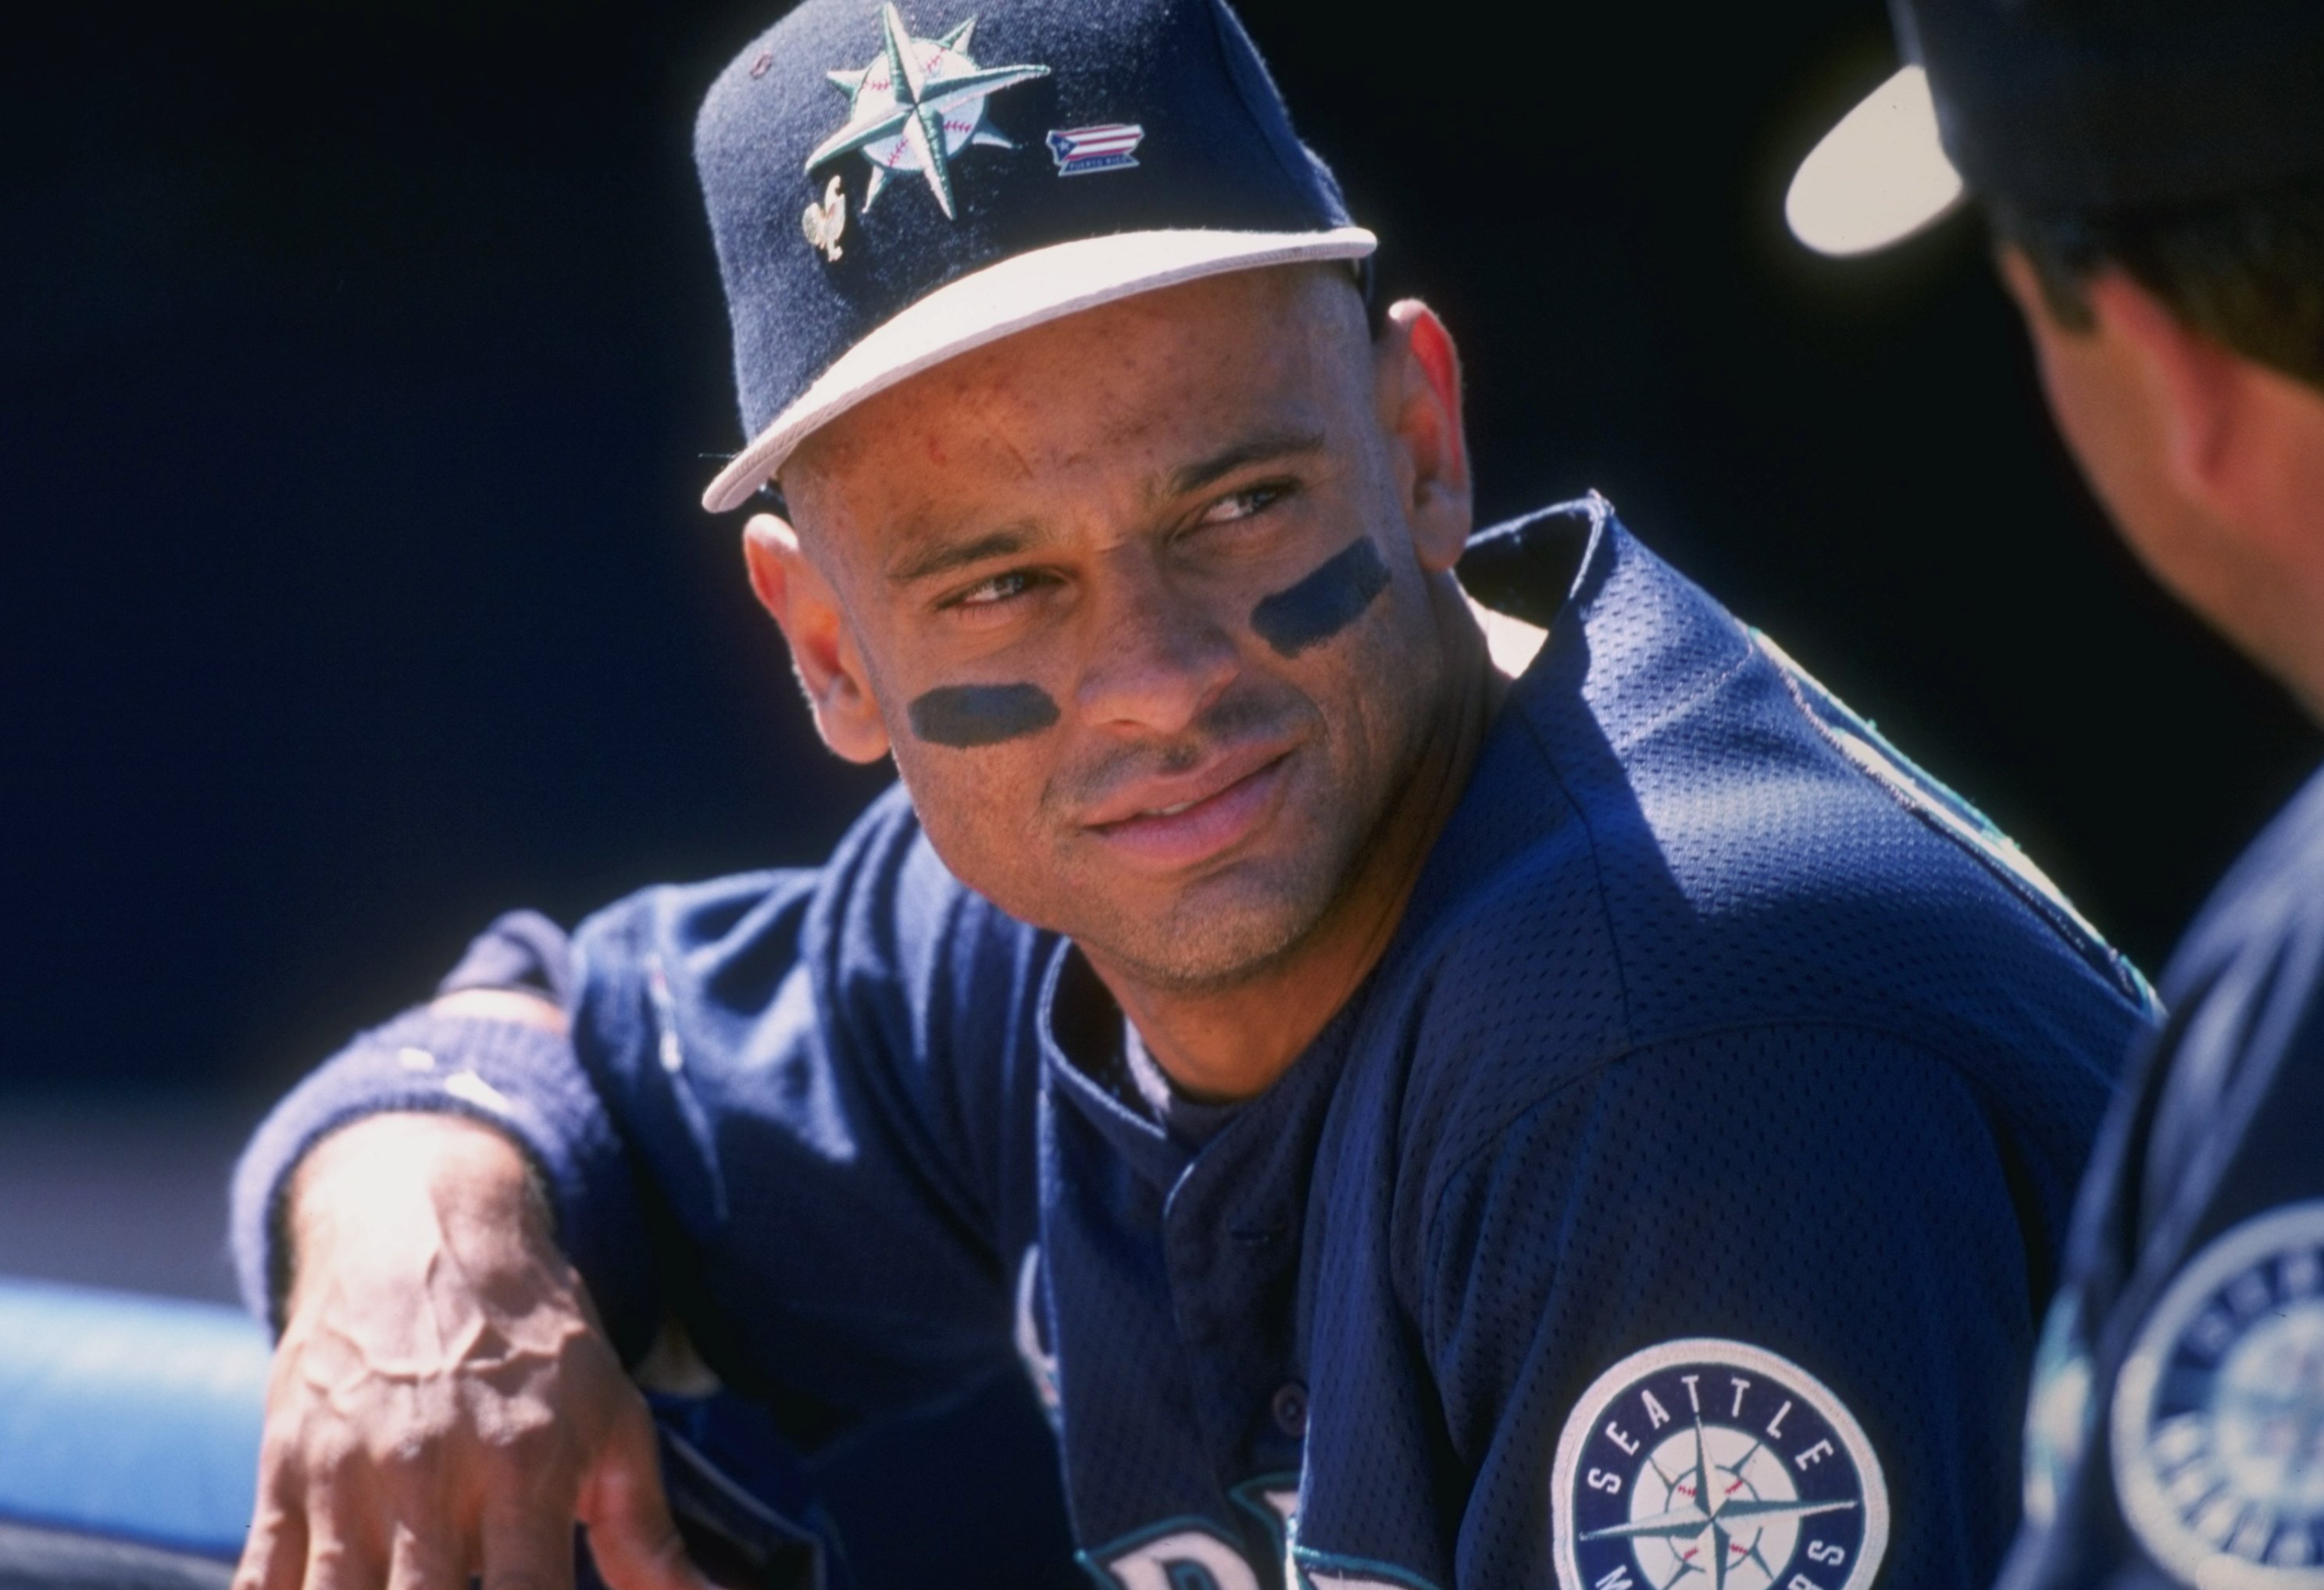 Roberto Alomar and the 15 Best Second Basemen of All Time